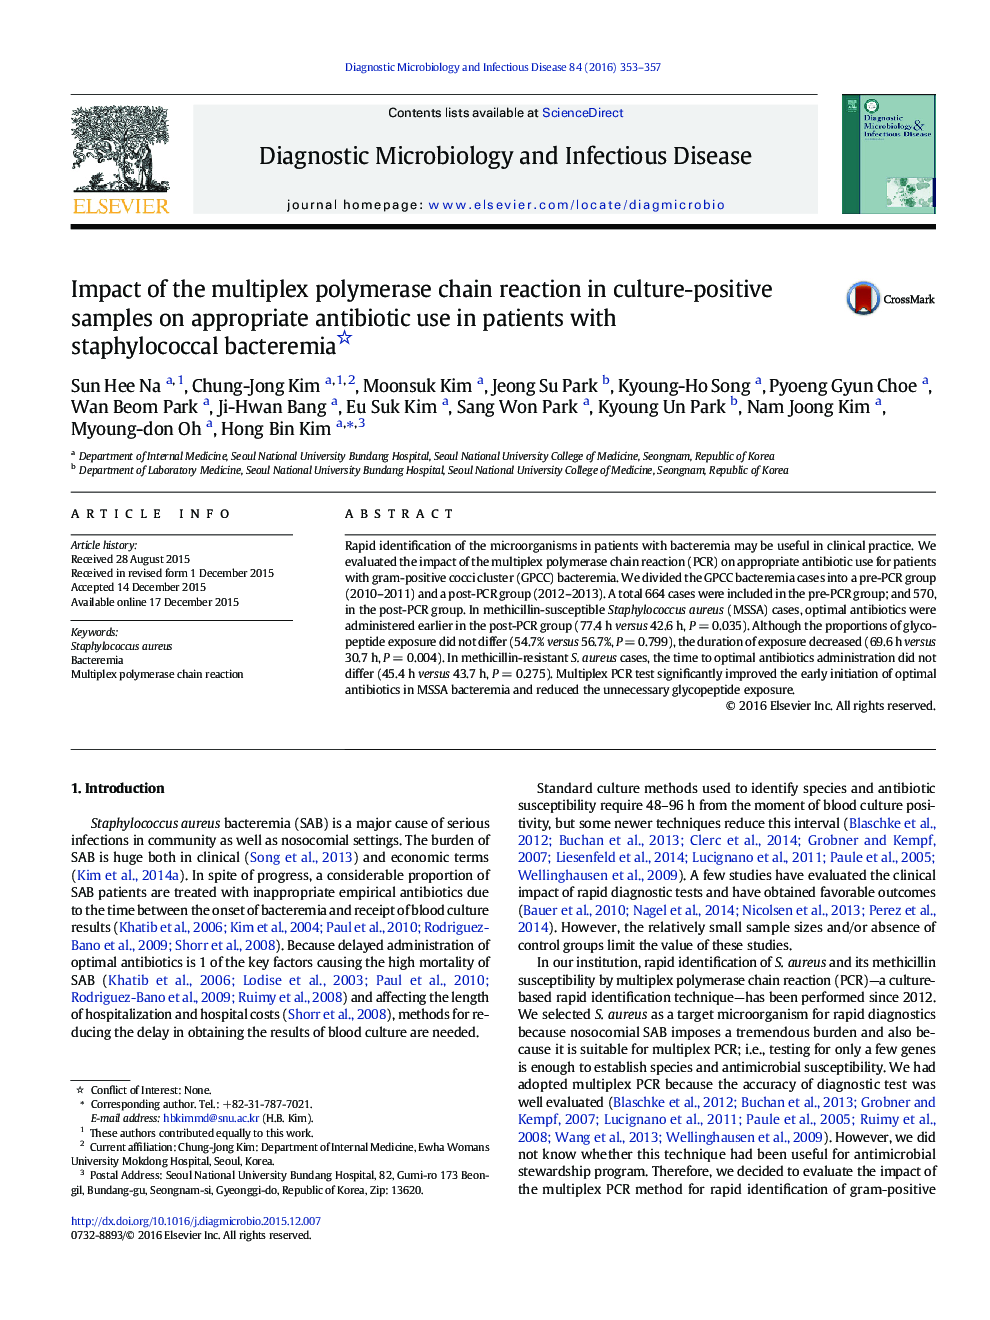 Impact of the multiplex polymerase chain reaction in culture-positive samples on appropriate antibiotic use in patients with staphylococcal bacteremia 